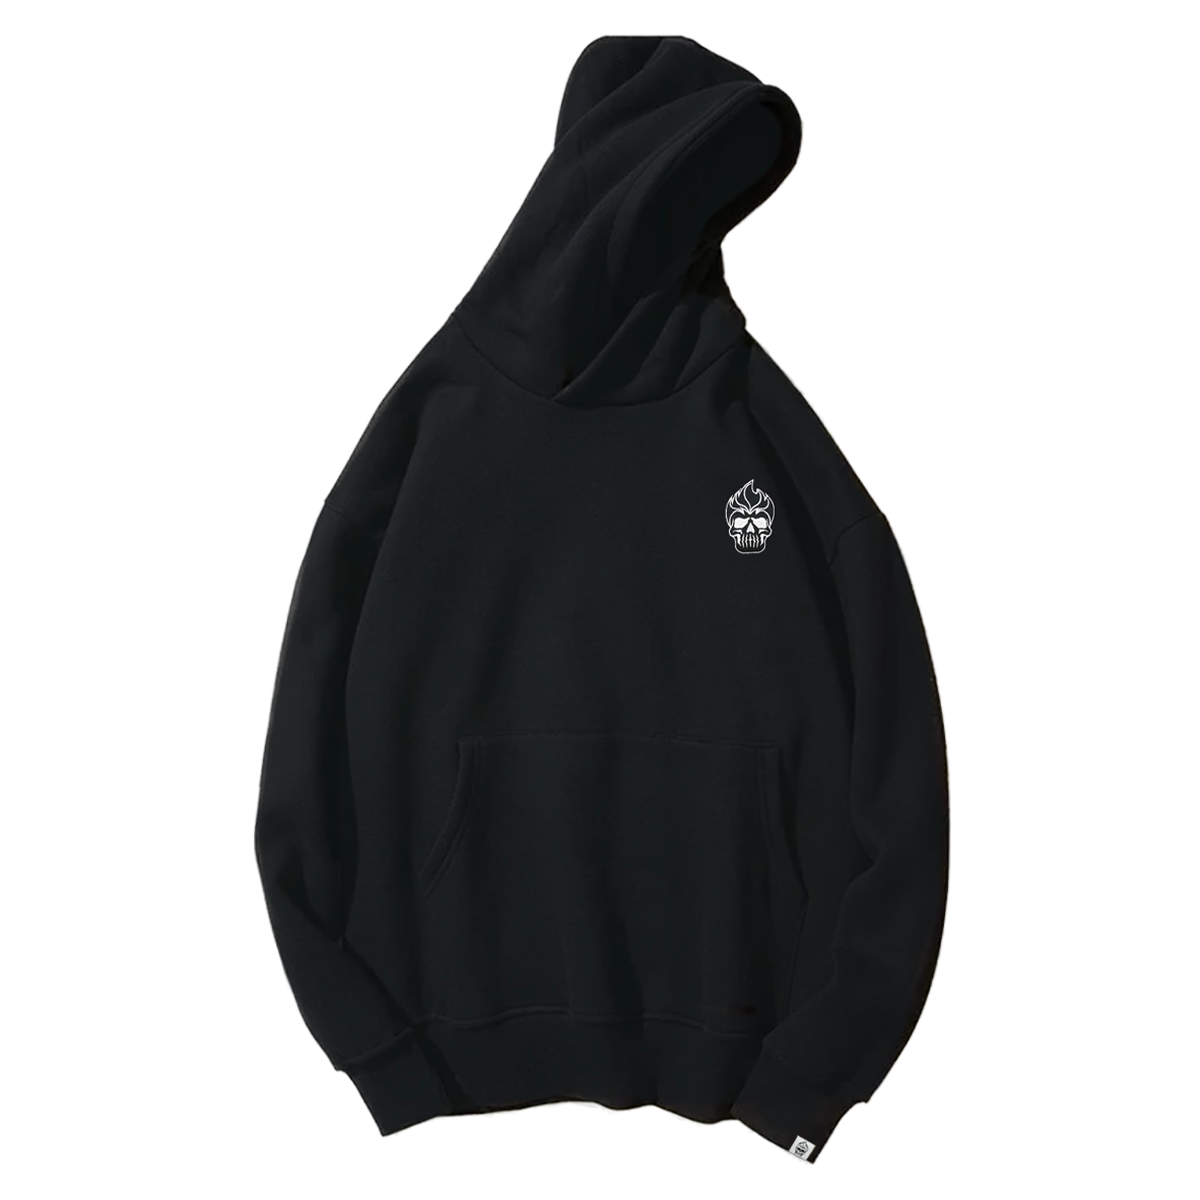 INCARNAPE SUNS "RALLEY THE VALLEY" PULL-OVER HOODIE